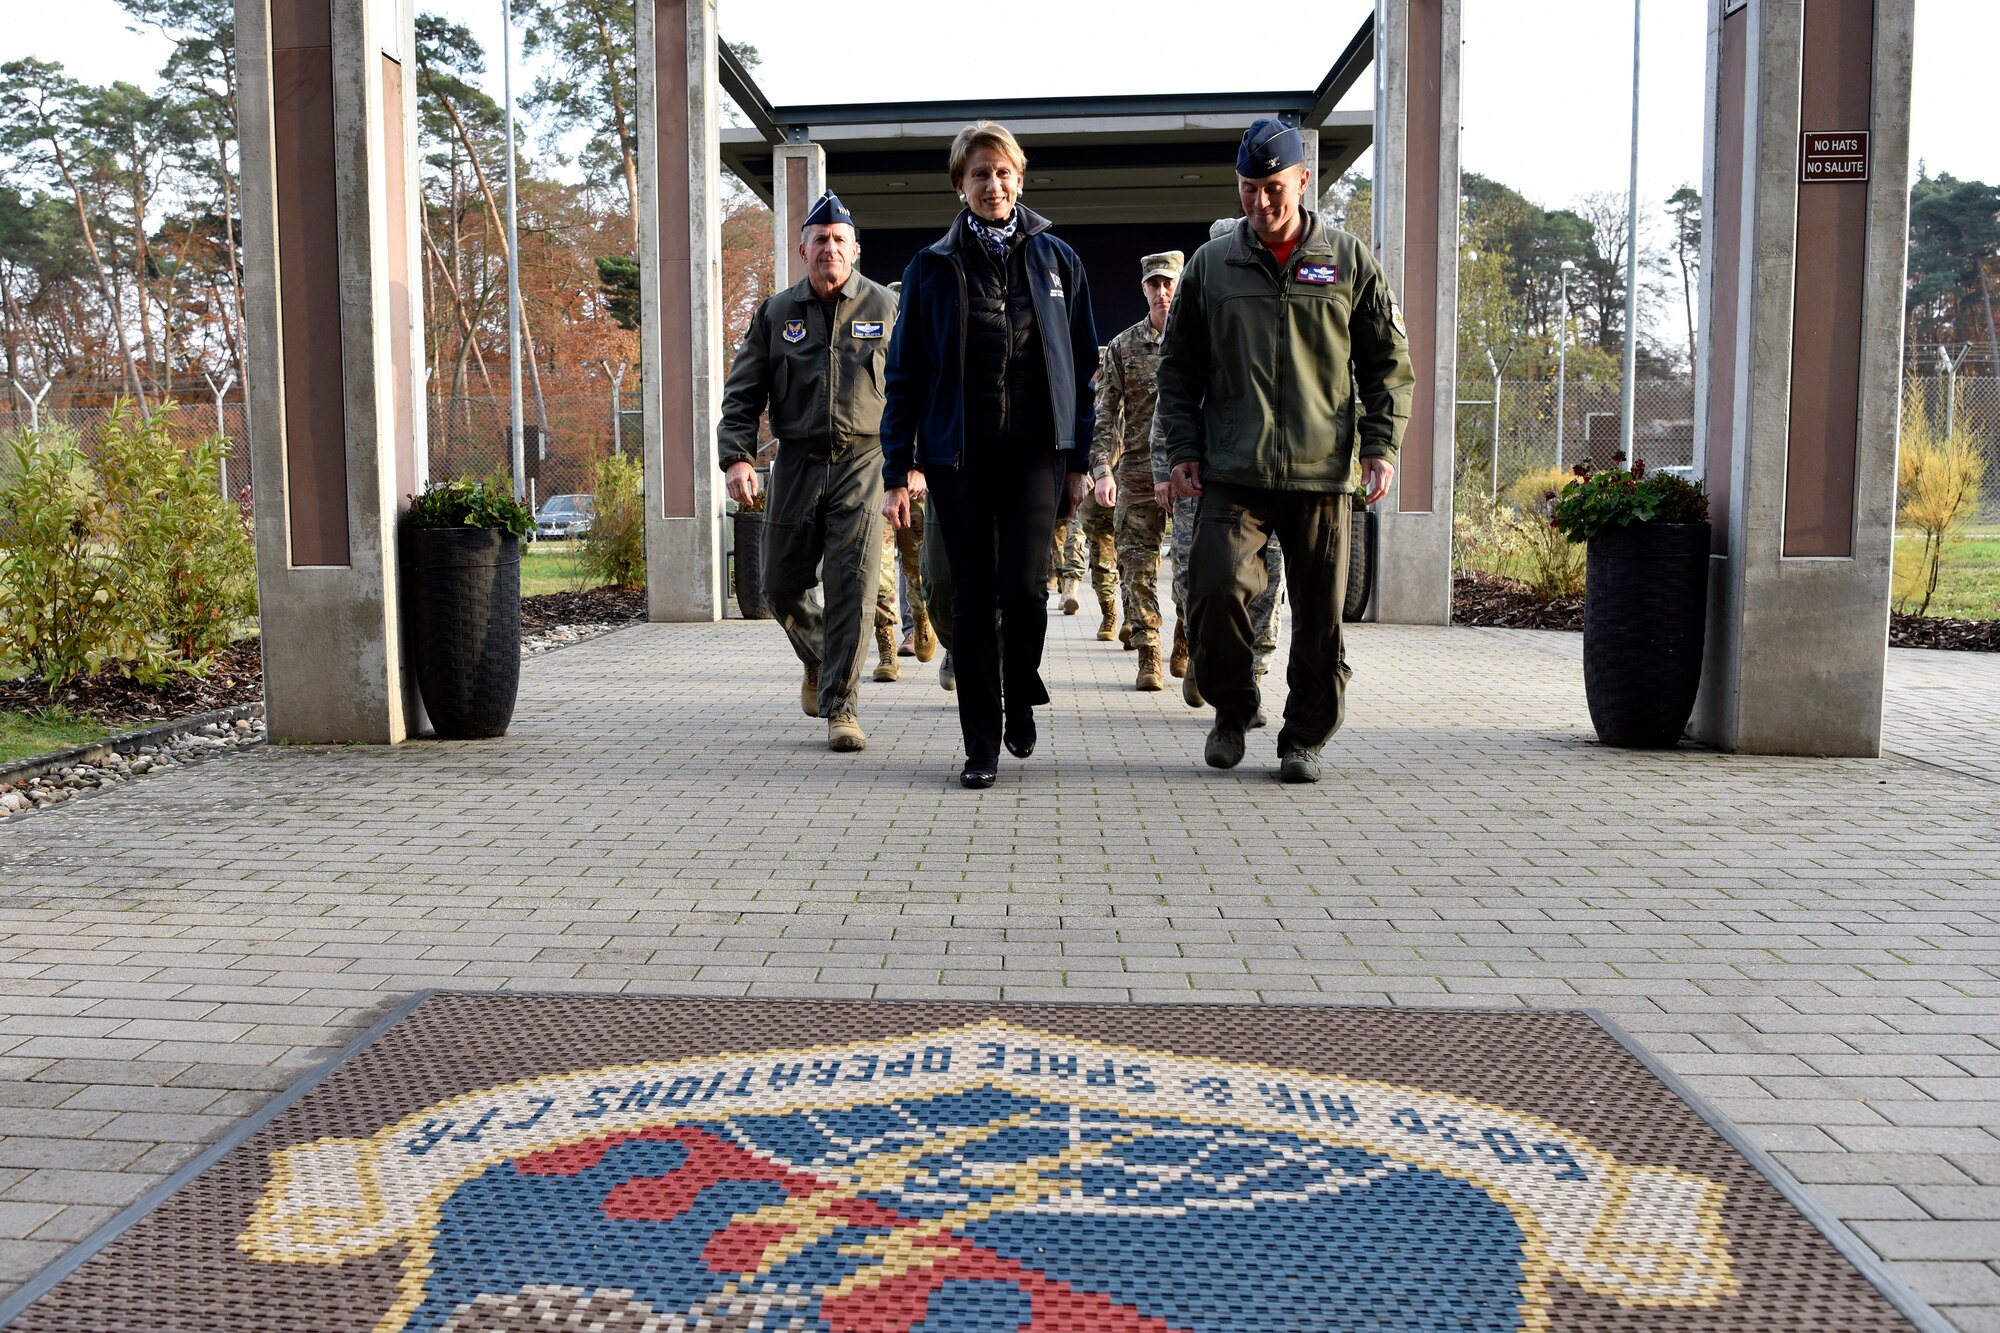 Secretary of the Air Force Barbara M. Barrett (center), U.S Air Force Chief of Staff Gen. David L. Goldfein, and Col. Cary Culbertson, 603rd Air Operations Center commander, walk towards the AOC during a base visit at Ramstein Air Base, Germany, Nov. 22, 2019.